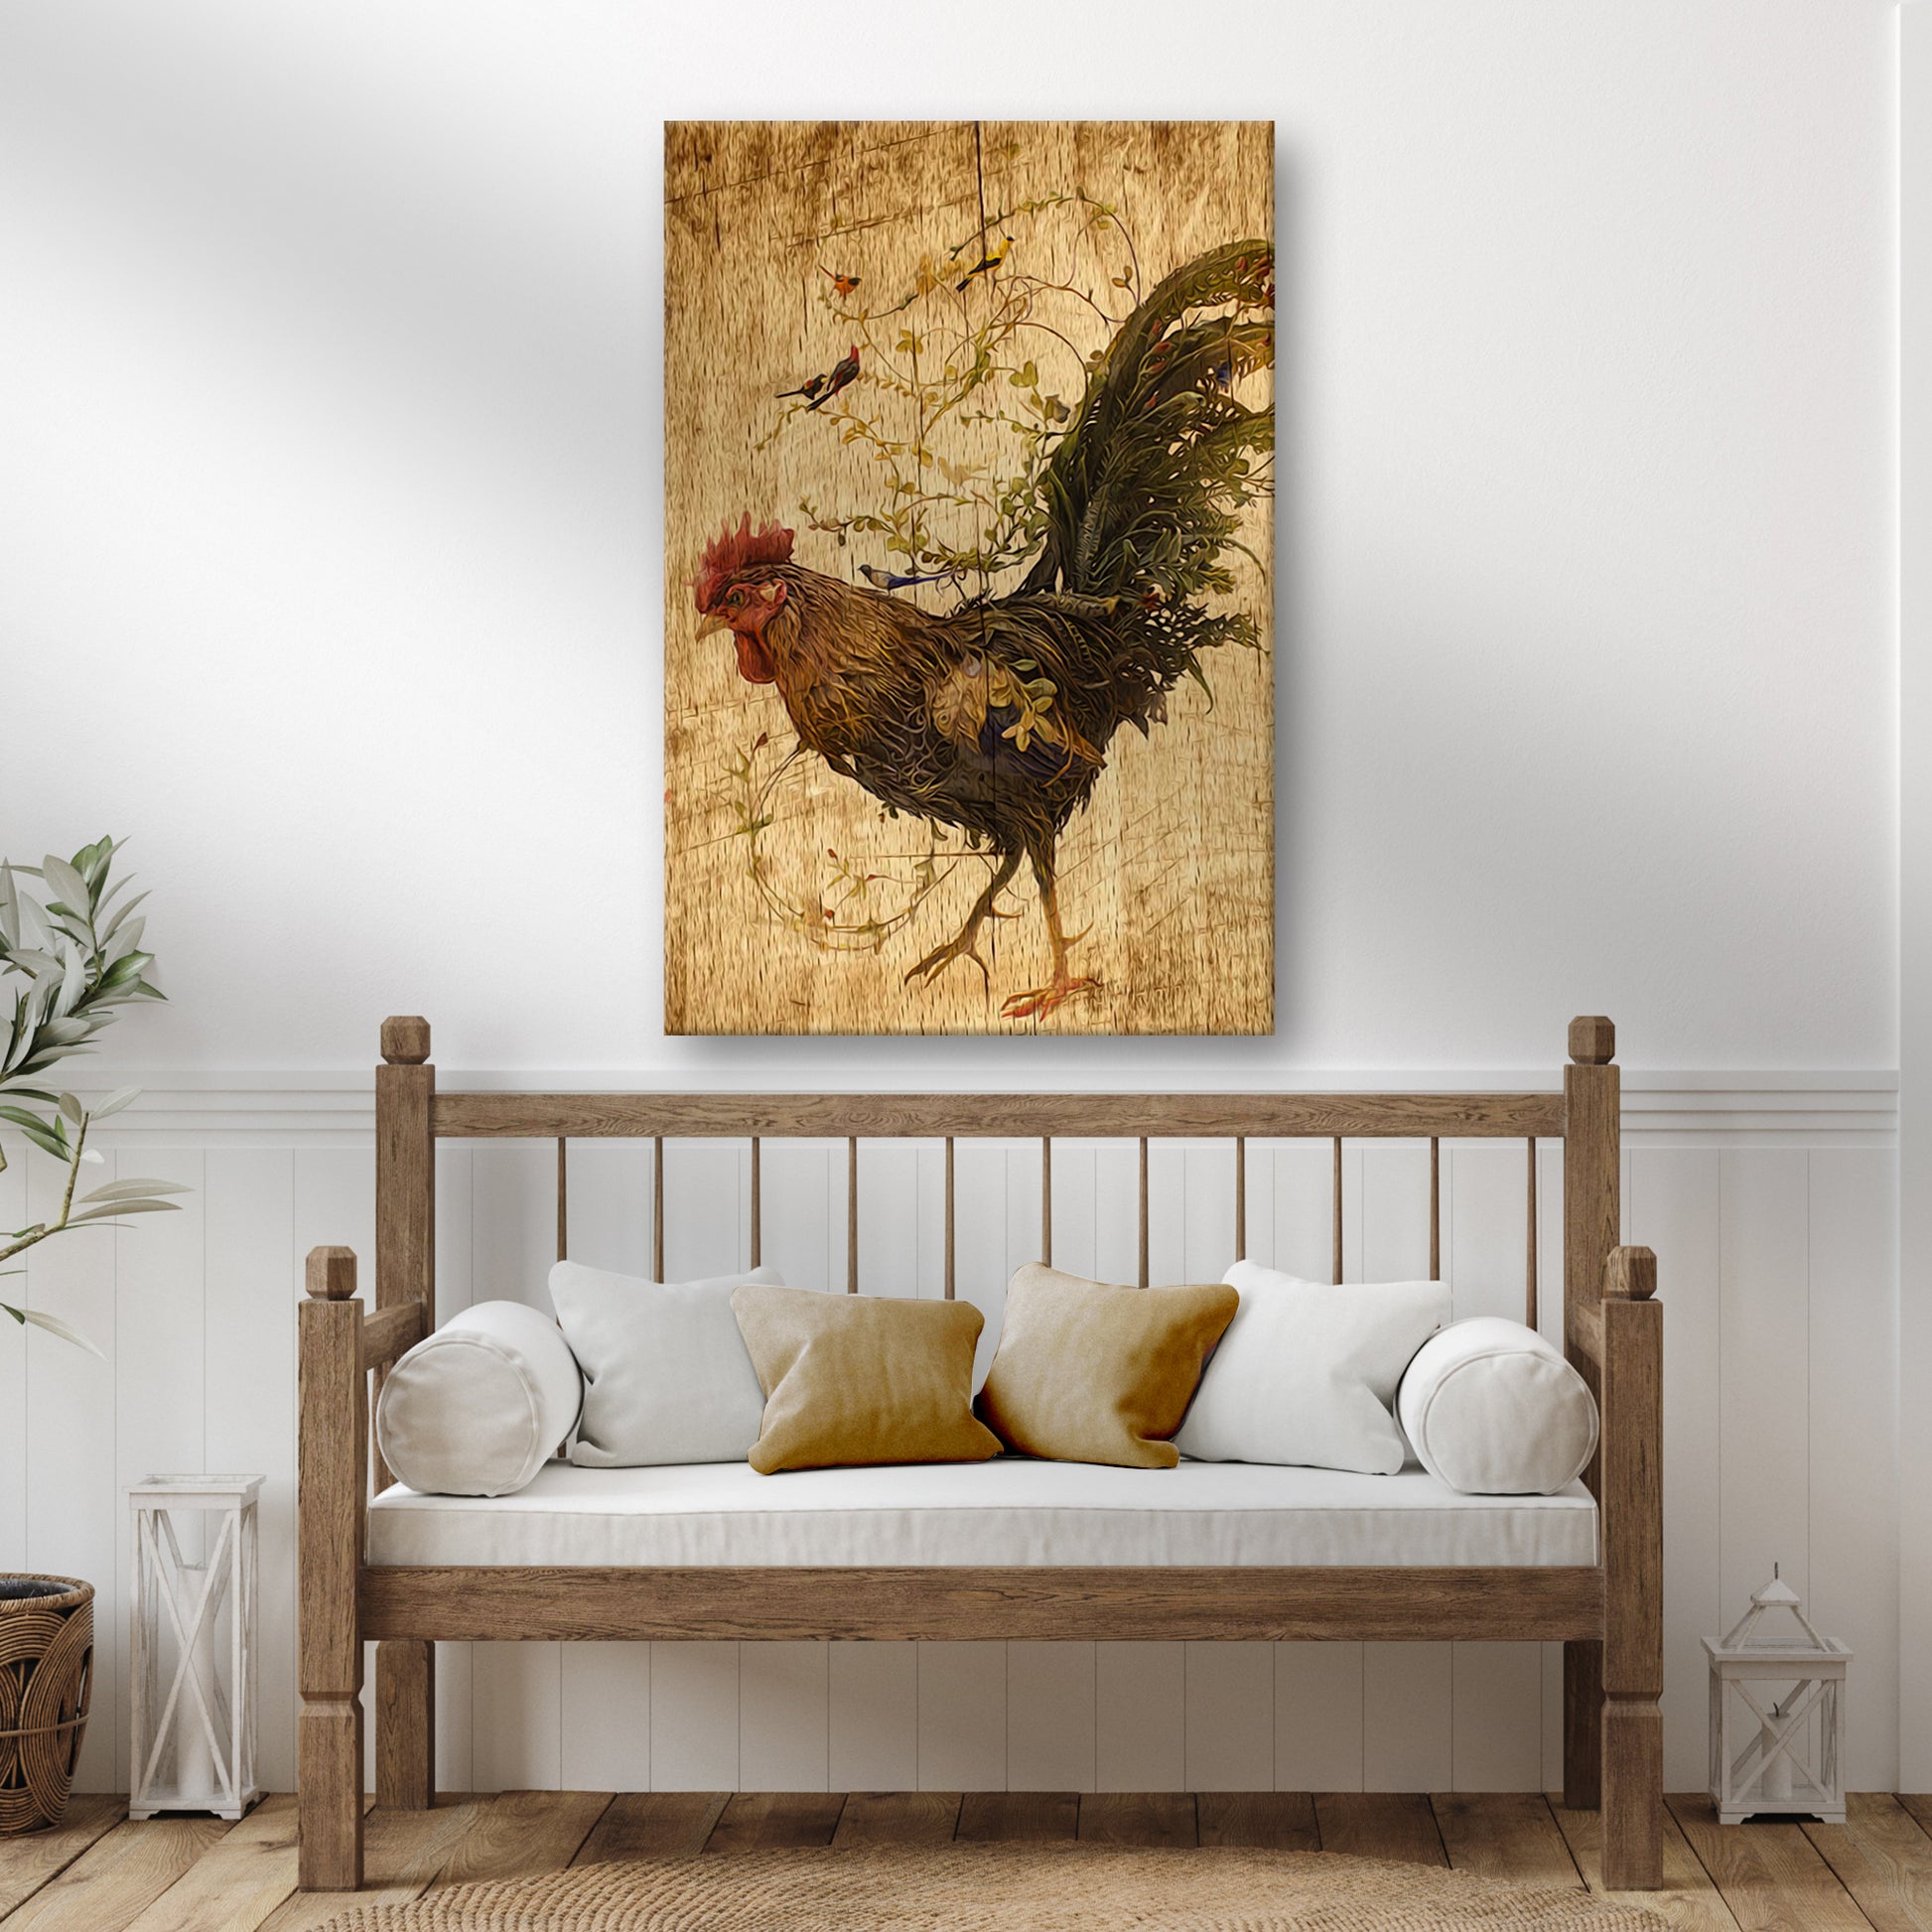 Rustic Leafy Rooster Canvas Wall Art - Image by Tailored Canvases